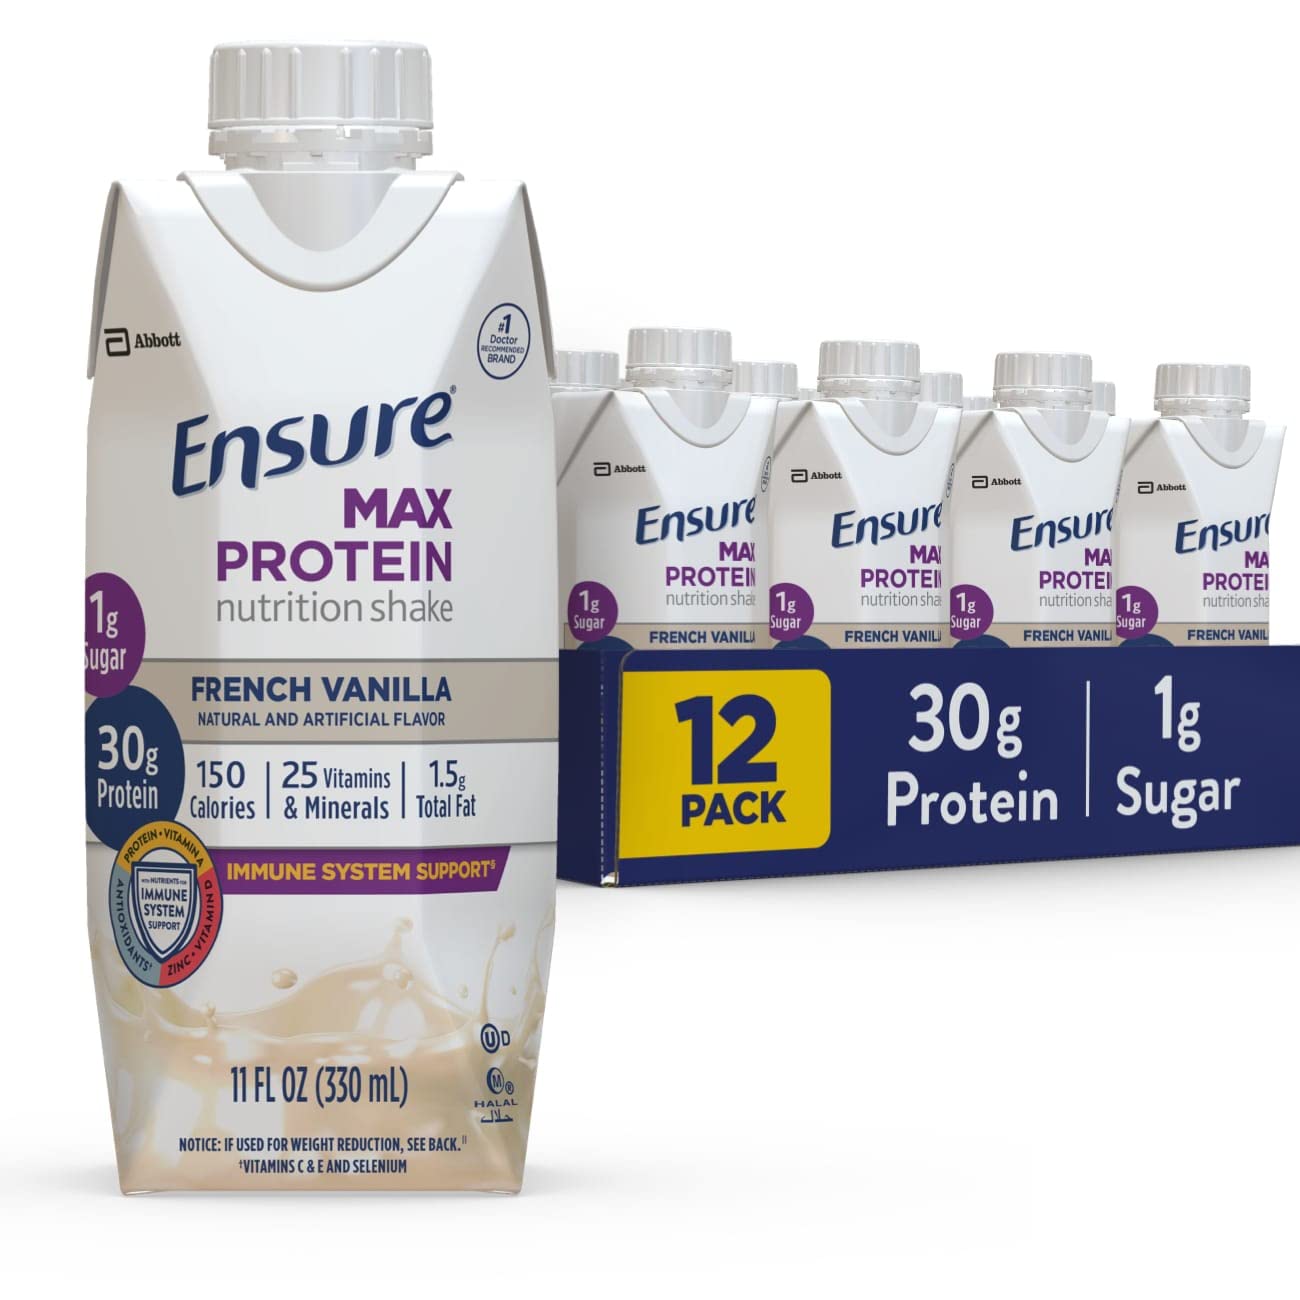 Ensure Max Protein Nutrition Shake with 30g of Protein & Max Protein Nutrition Shake with 30g of Protein, 1g of Sugar, High Protein Shake, Creamy Strawberry, 11 fl oz, (Pack of 12)